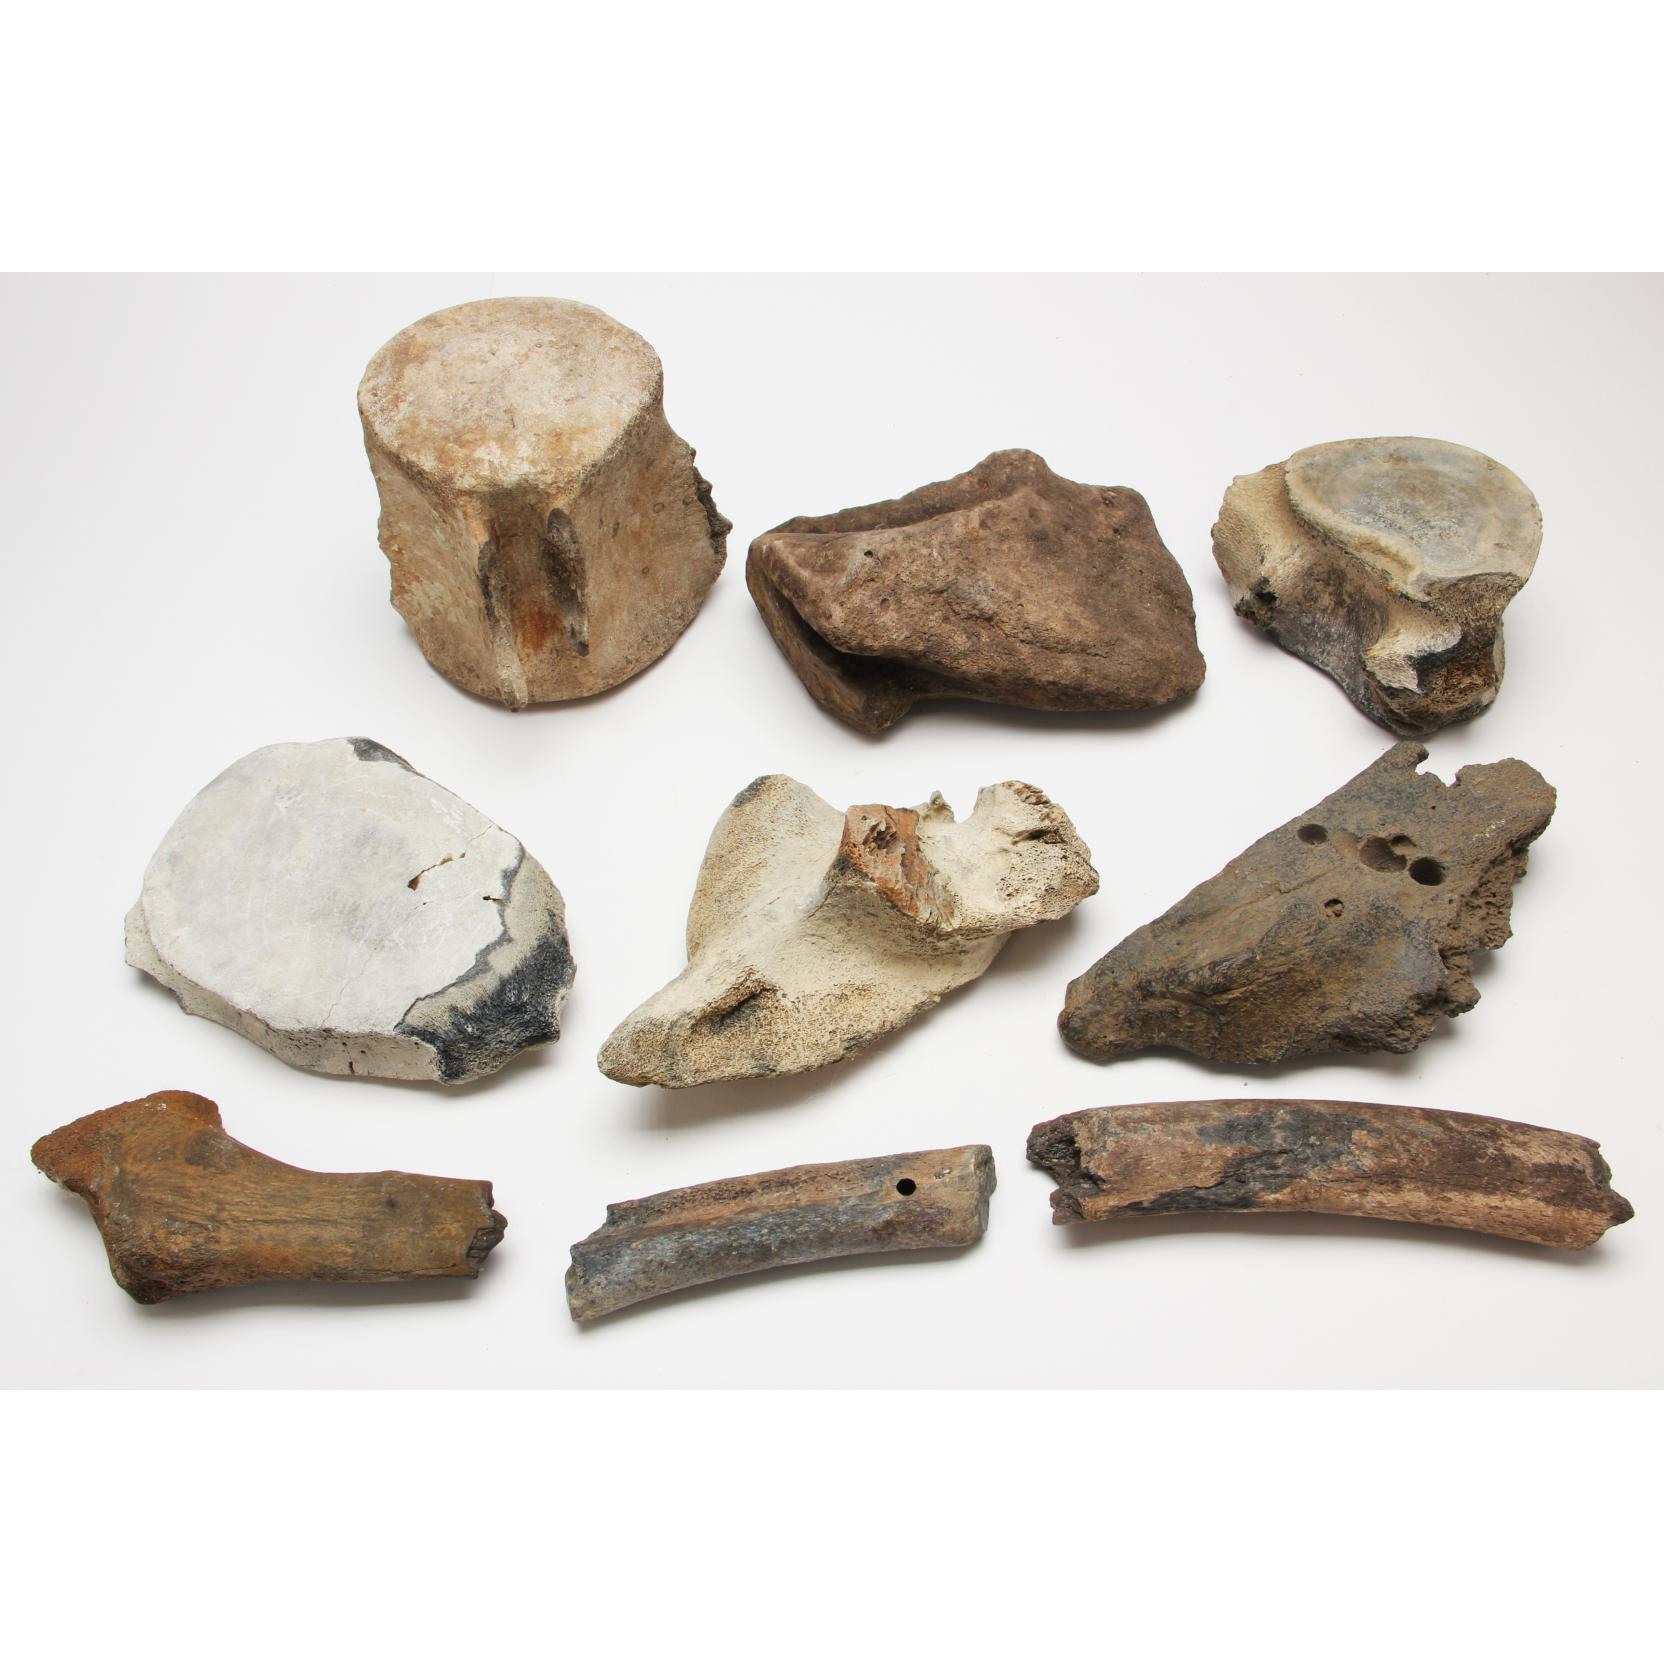 Nine Fossilized Whale Bones and Bone Fragments (Lot 18 - The Frank Menser  Fossil and Mineral Online AuctionJun 17, 2015, 6:00pm)